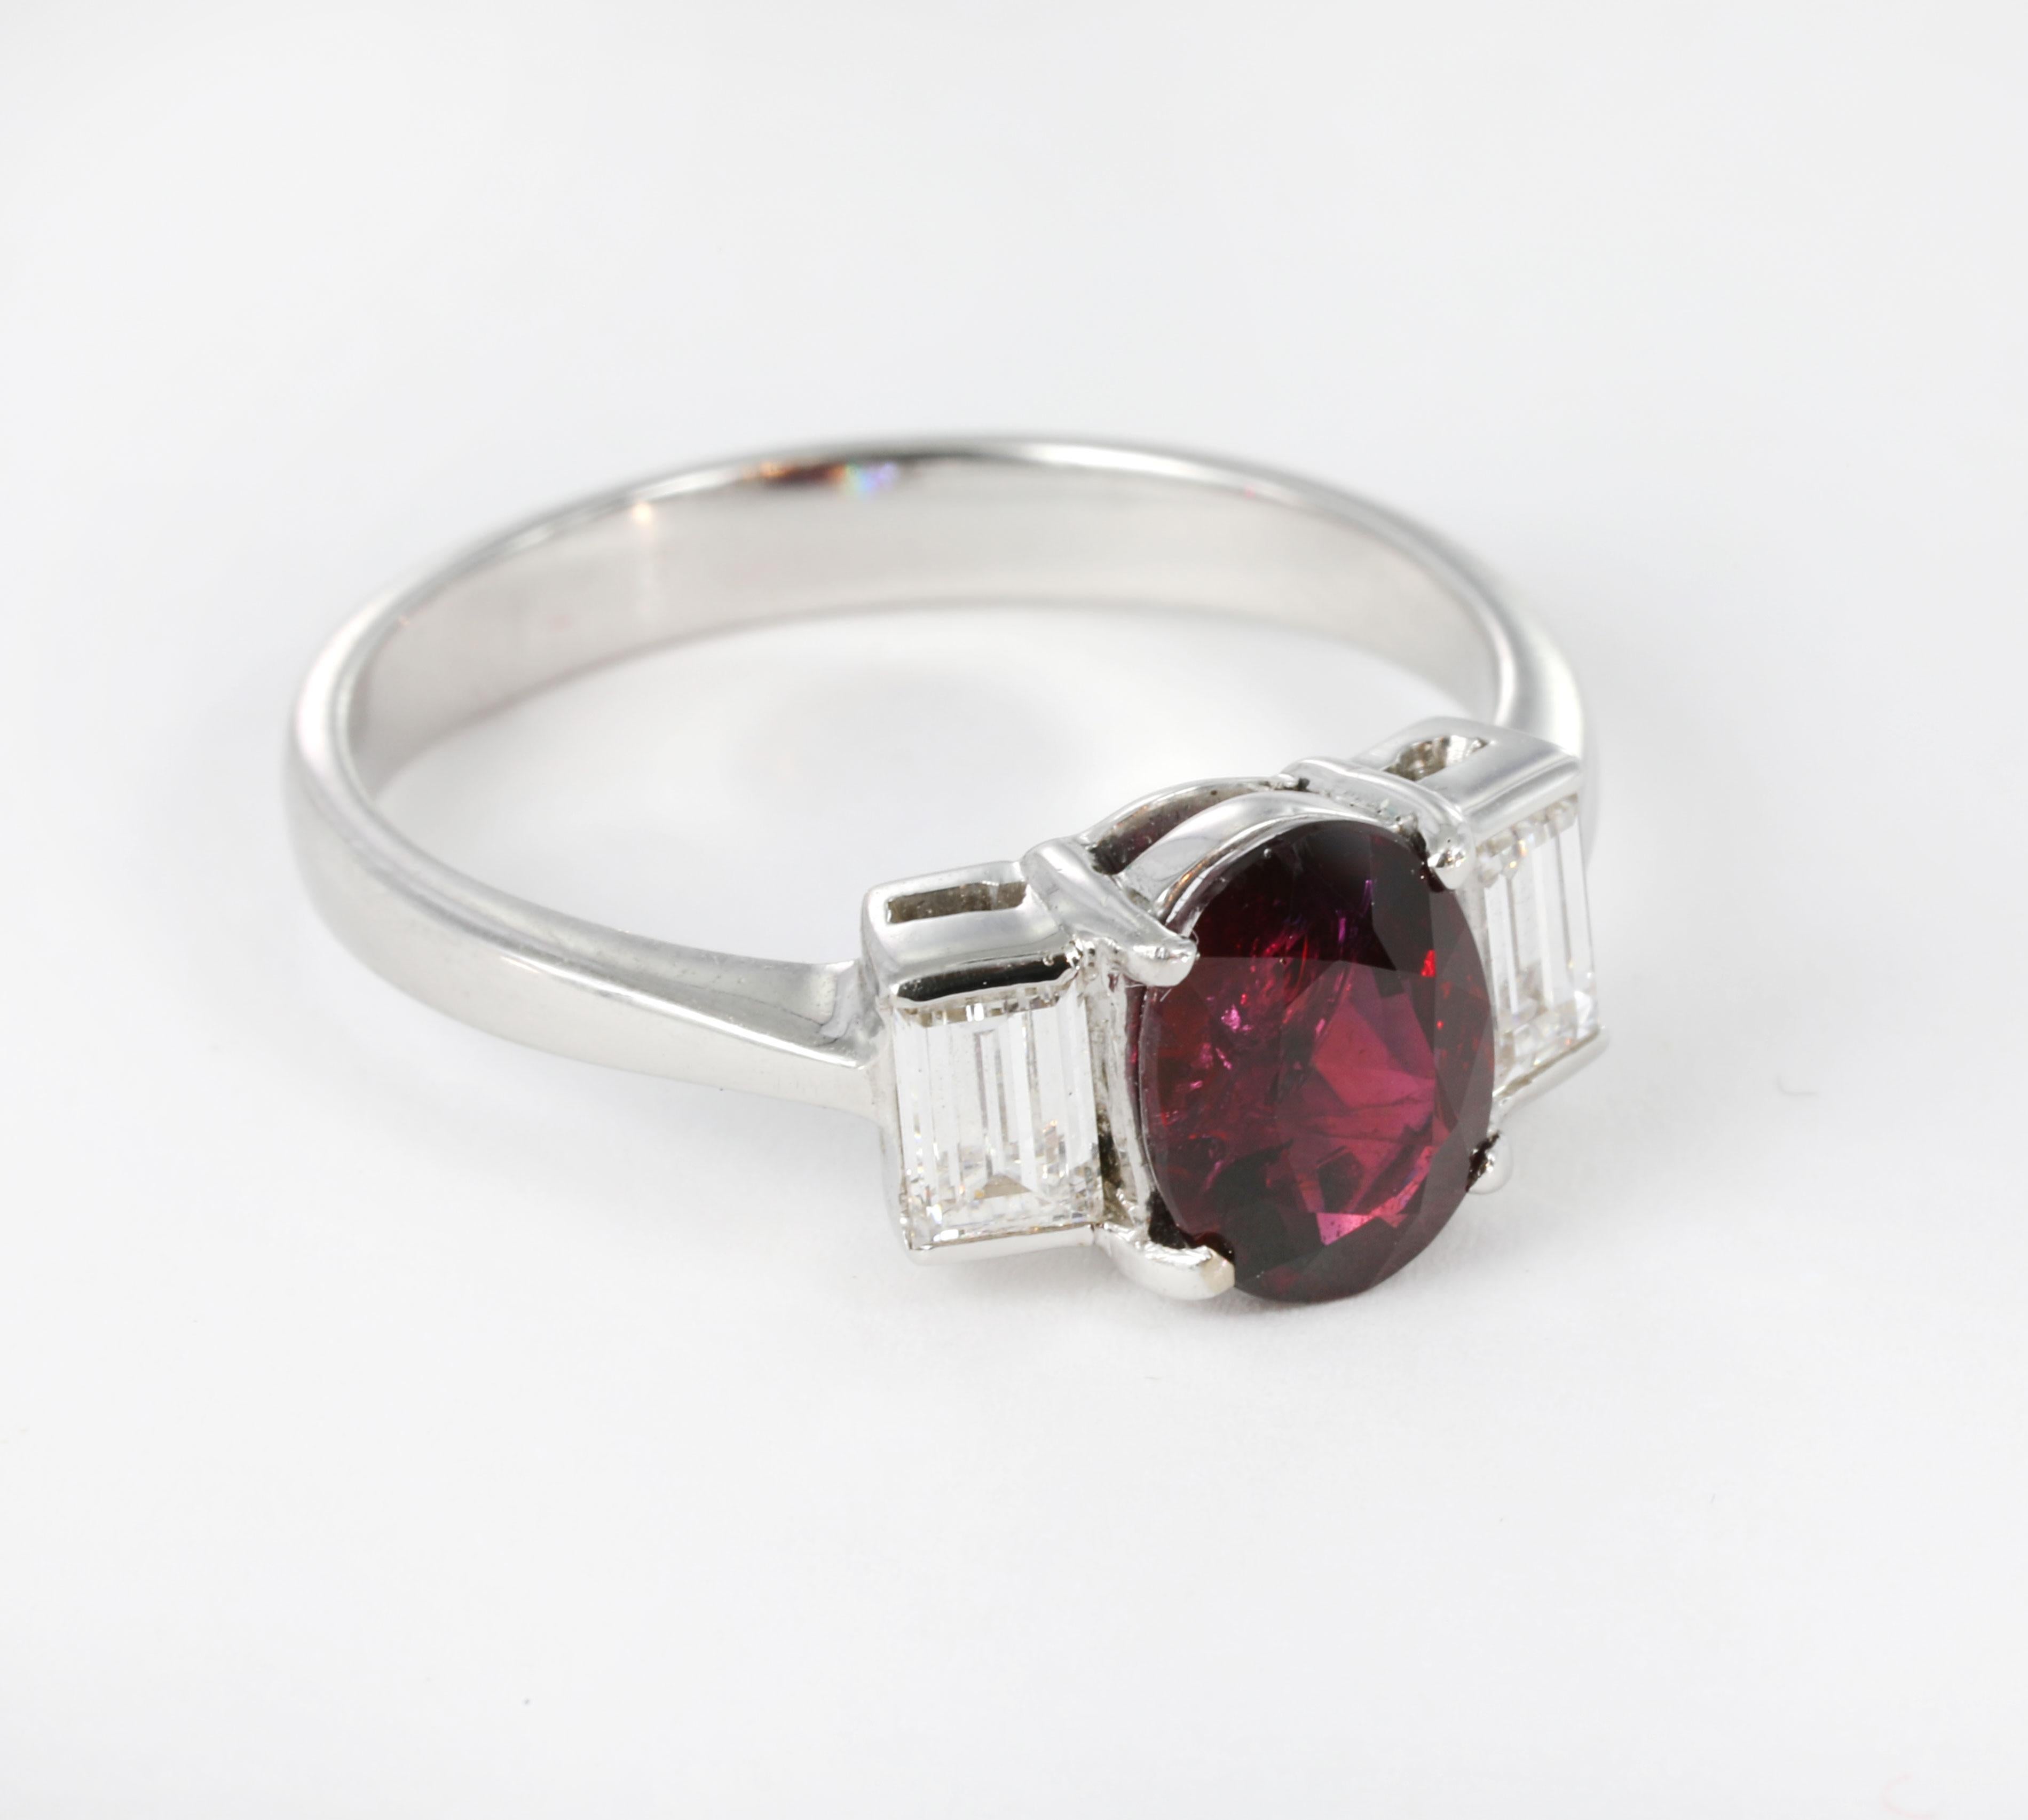 Unheated 1.54 Carat “Pigeon’s Blood” Ruby & Diamond 18K Gold Ring, GIA Certified In Good Condition For Sale In Pasadena, CA